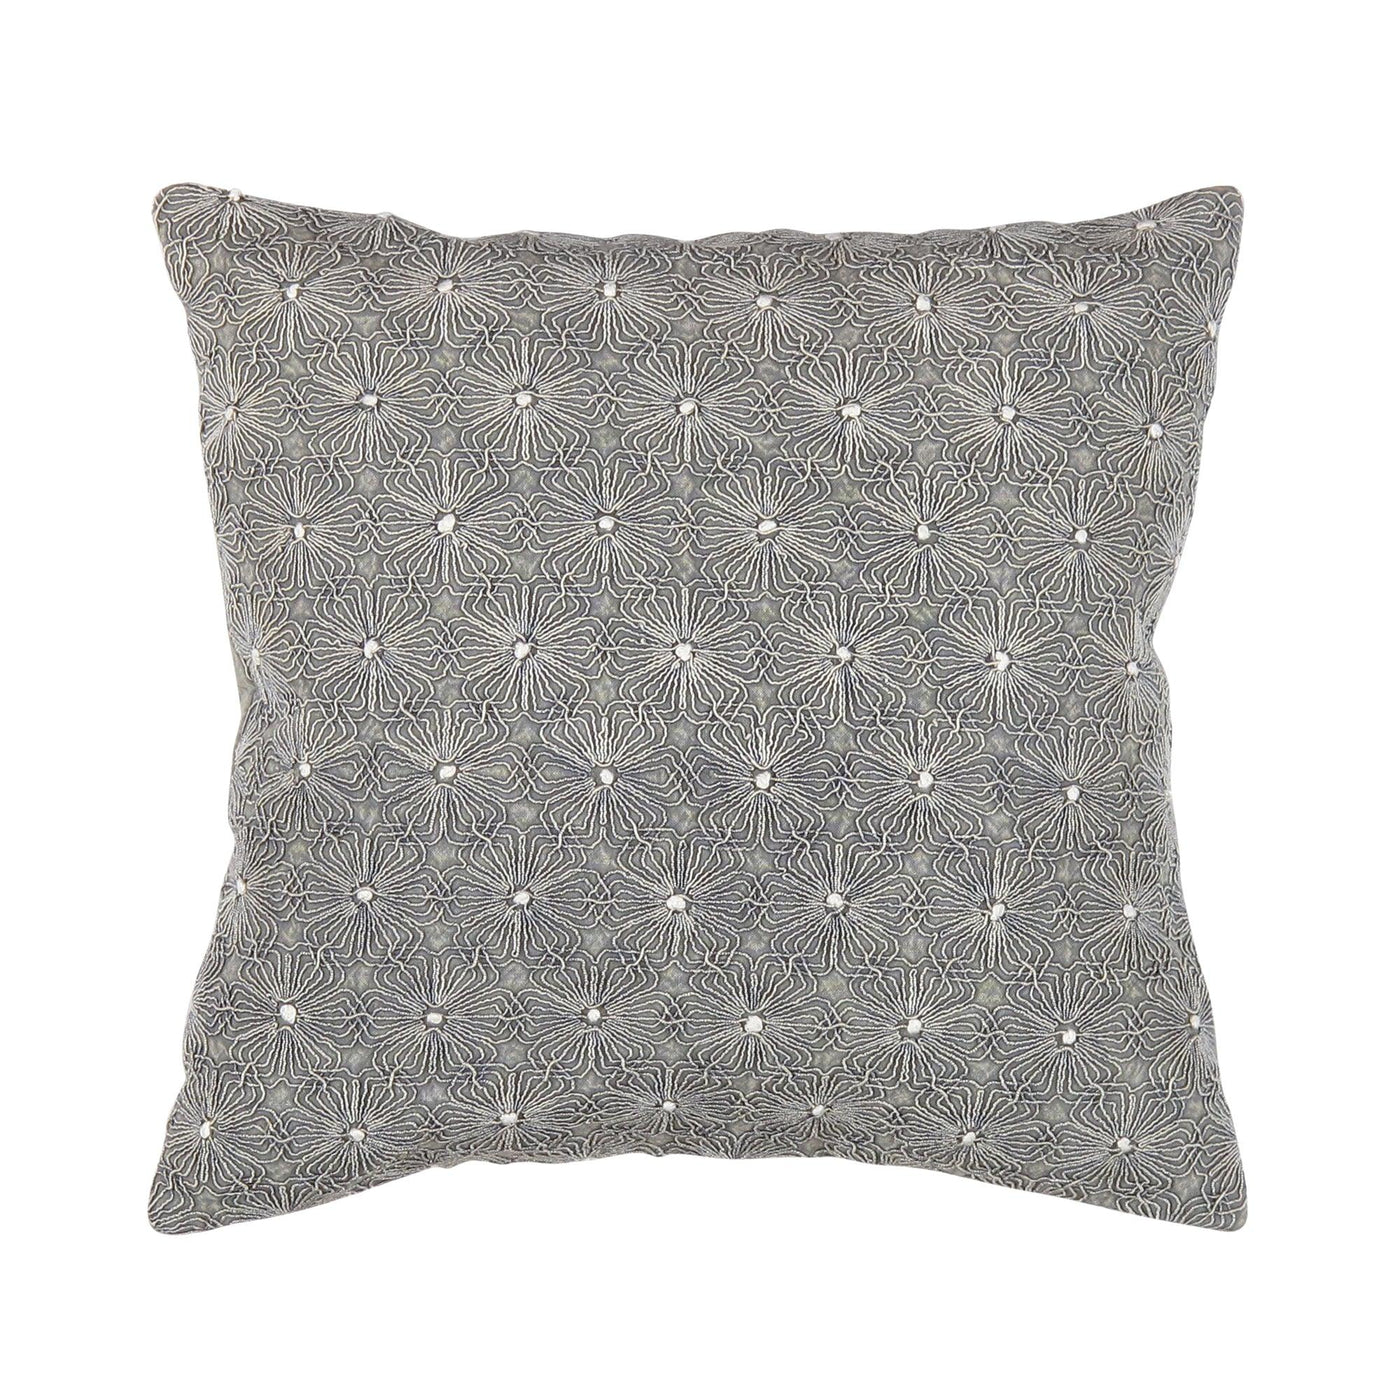 Canvello Naples Embroidered Pillow, Grey/Ivory